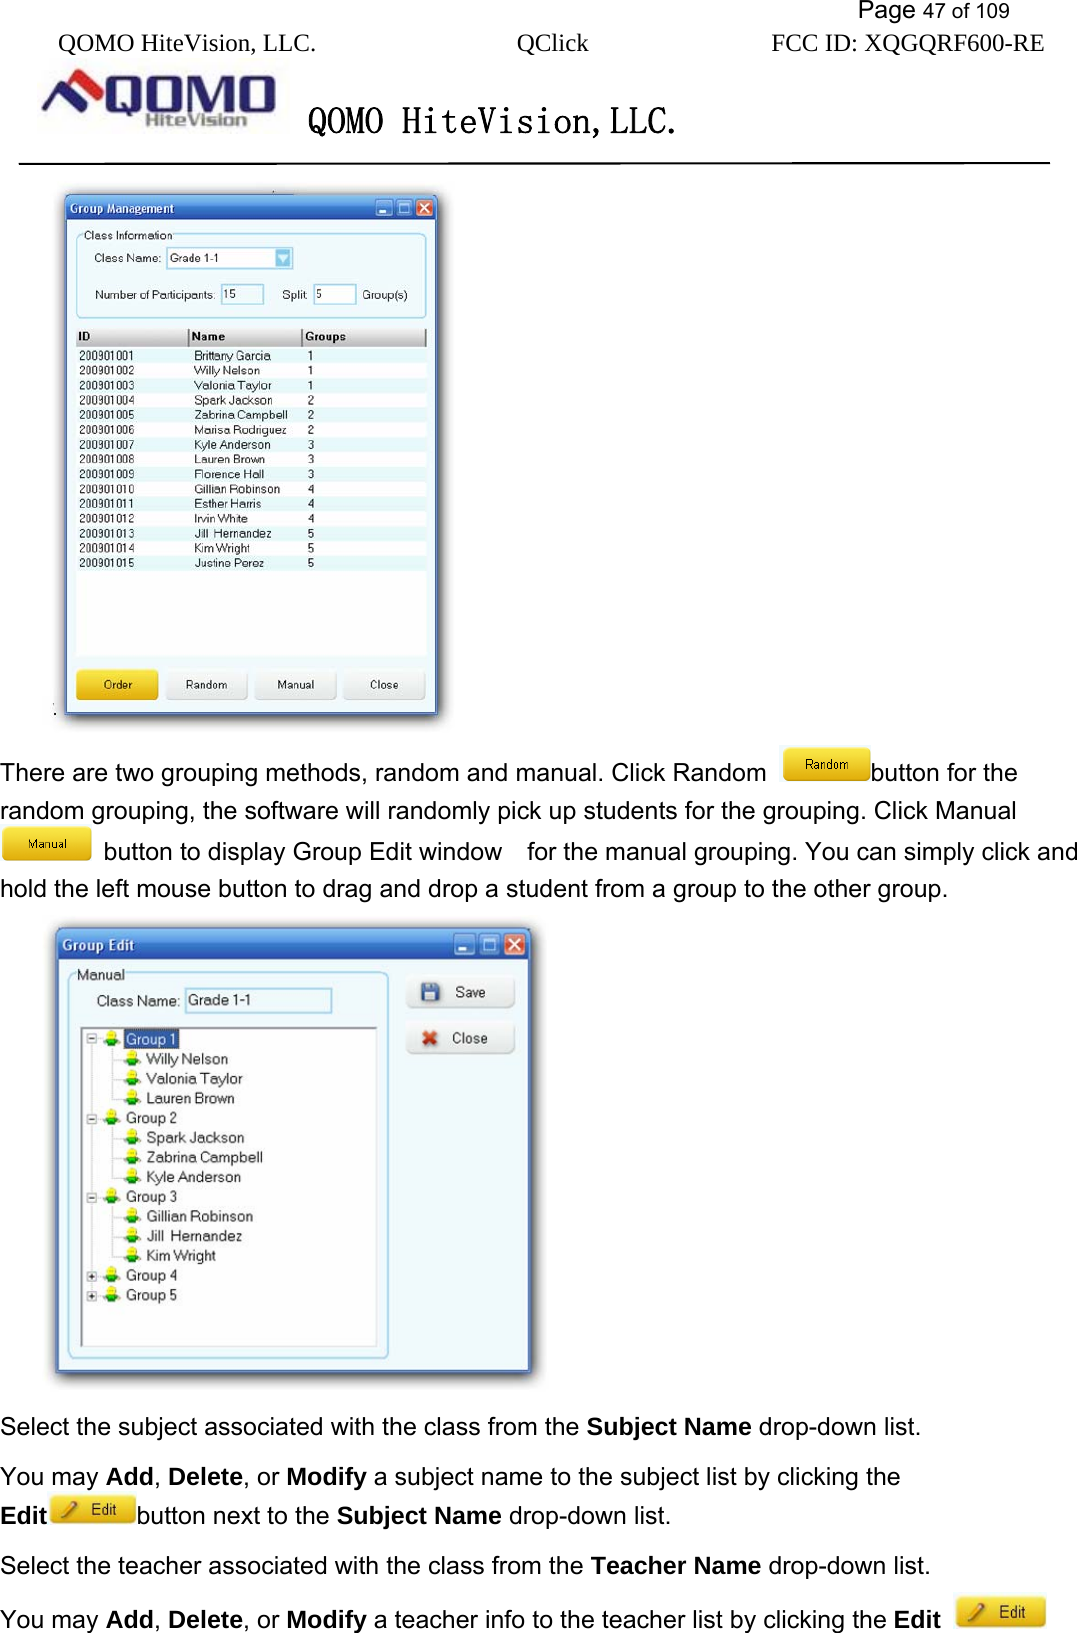           Page 47 of 109 QOMO HiteVision, LLC.  QClick        FCC ID: XQGQRF600-RE     QOMO HiteVision,LLC.    There are two grouping methods, random and manual. Click Random  button for the random grouping, the software will randomly pick up students for the grouping. Click Manual   button to display Group Edit window    for the manual grouping. You can simply click and hold the left mouse button to drag and drop a student from a group to the other group.  Select the subject associated with the class from the Subject Name drop-down list. You may Add, Delete, or Modify a subject name to the subject list by clicking the Edit button next to the Subject Name drop-down list. Select the teacher associated with the class from the Teacher Name drop-down list. You may Add, Delete, or Modify a teacher info to the teacher list by clicking the Edit  